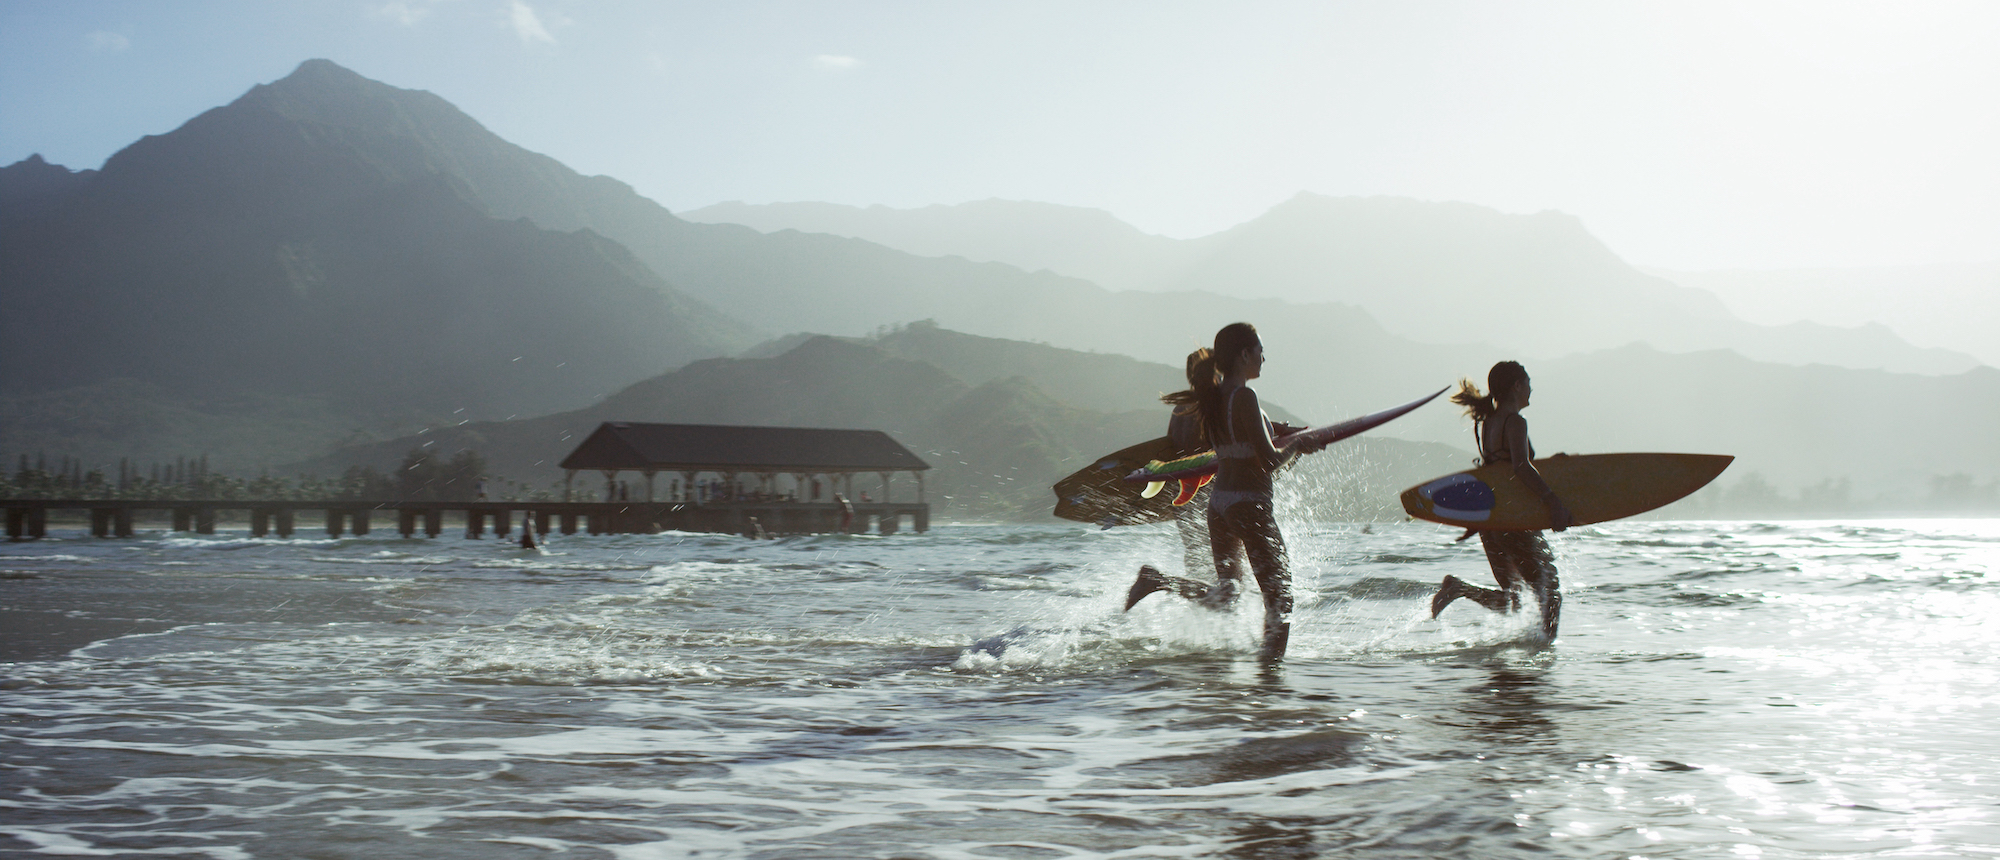 Three people on a beach, running into the ocean with surboards in a tropical climate, with mountains in the background.